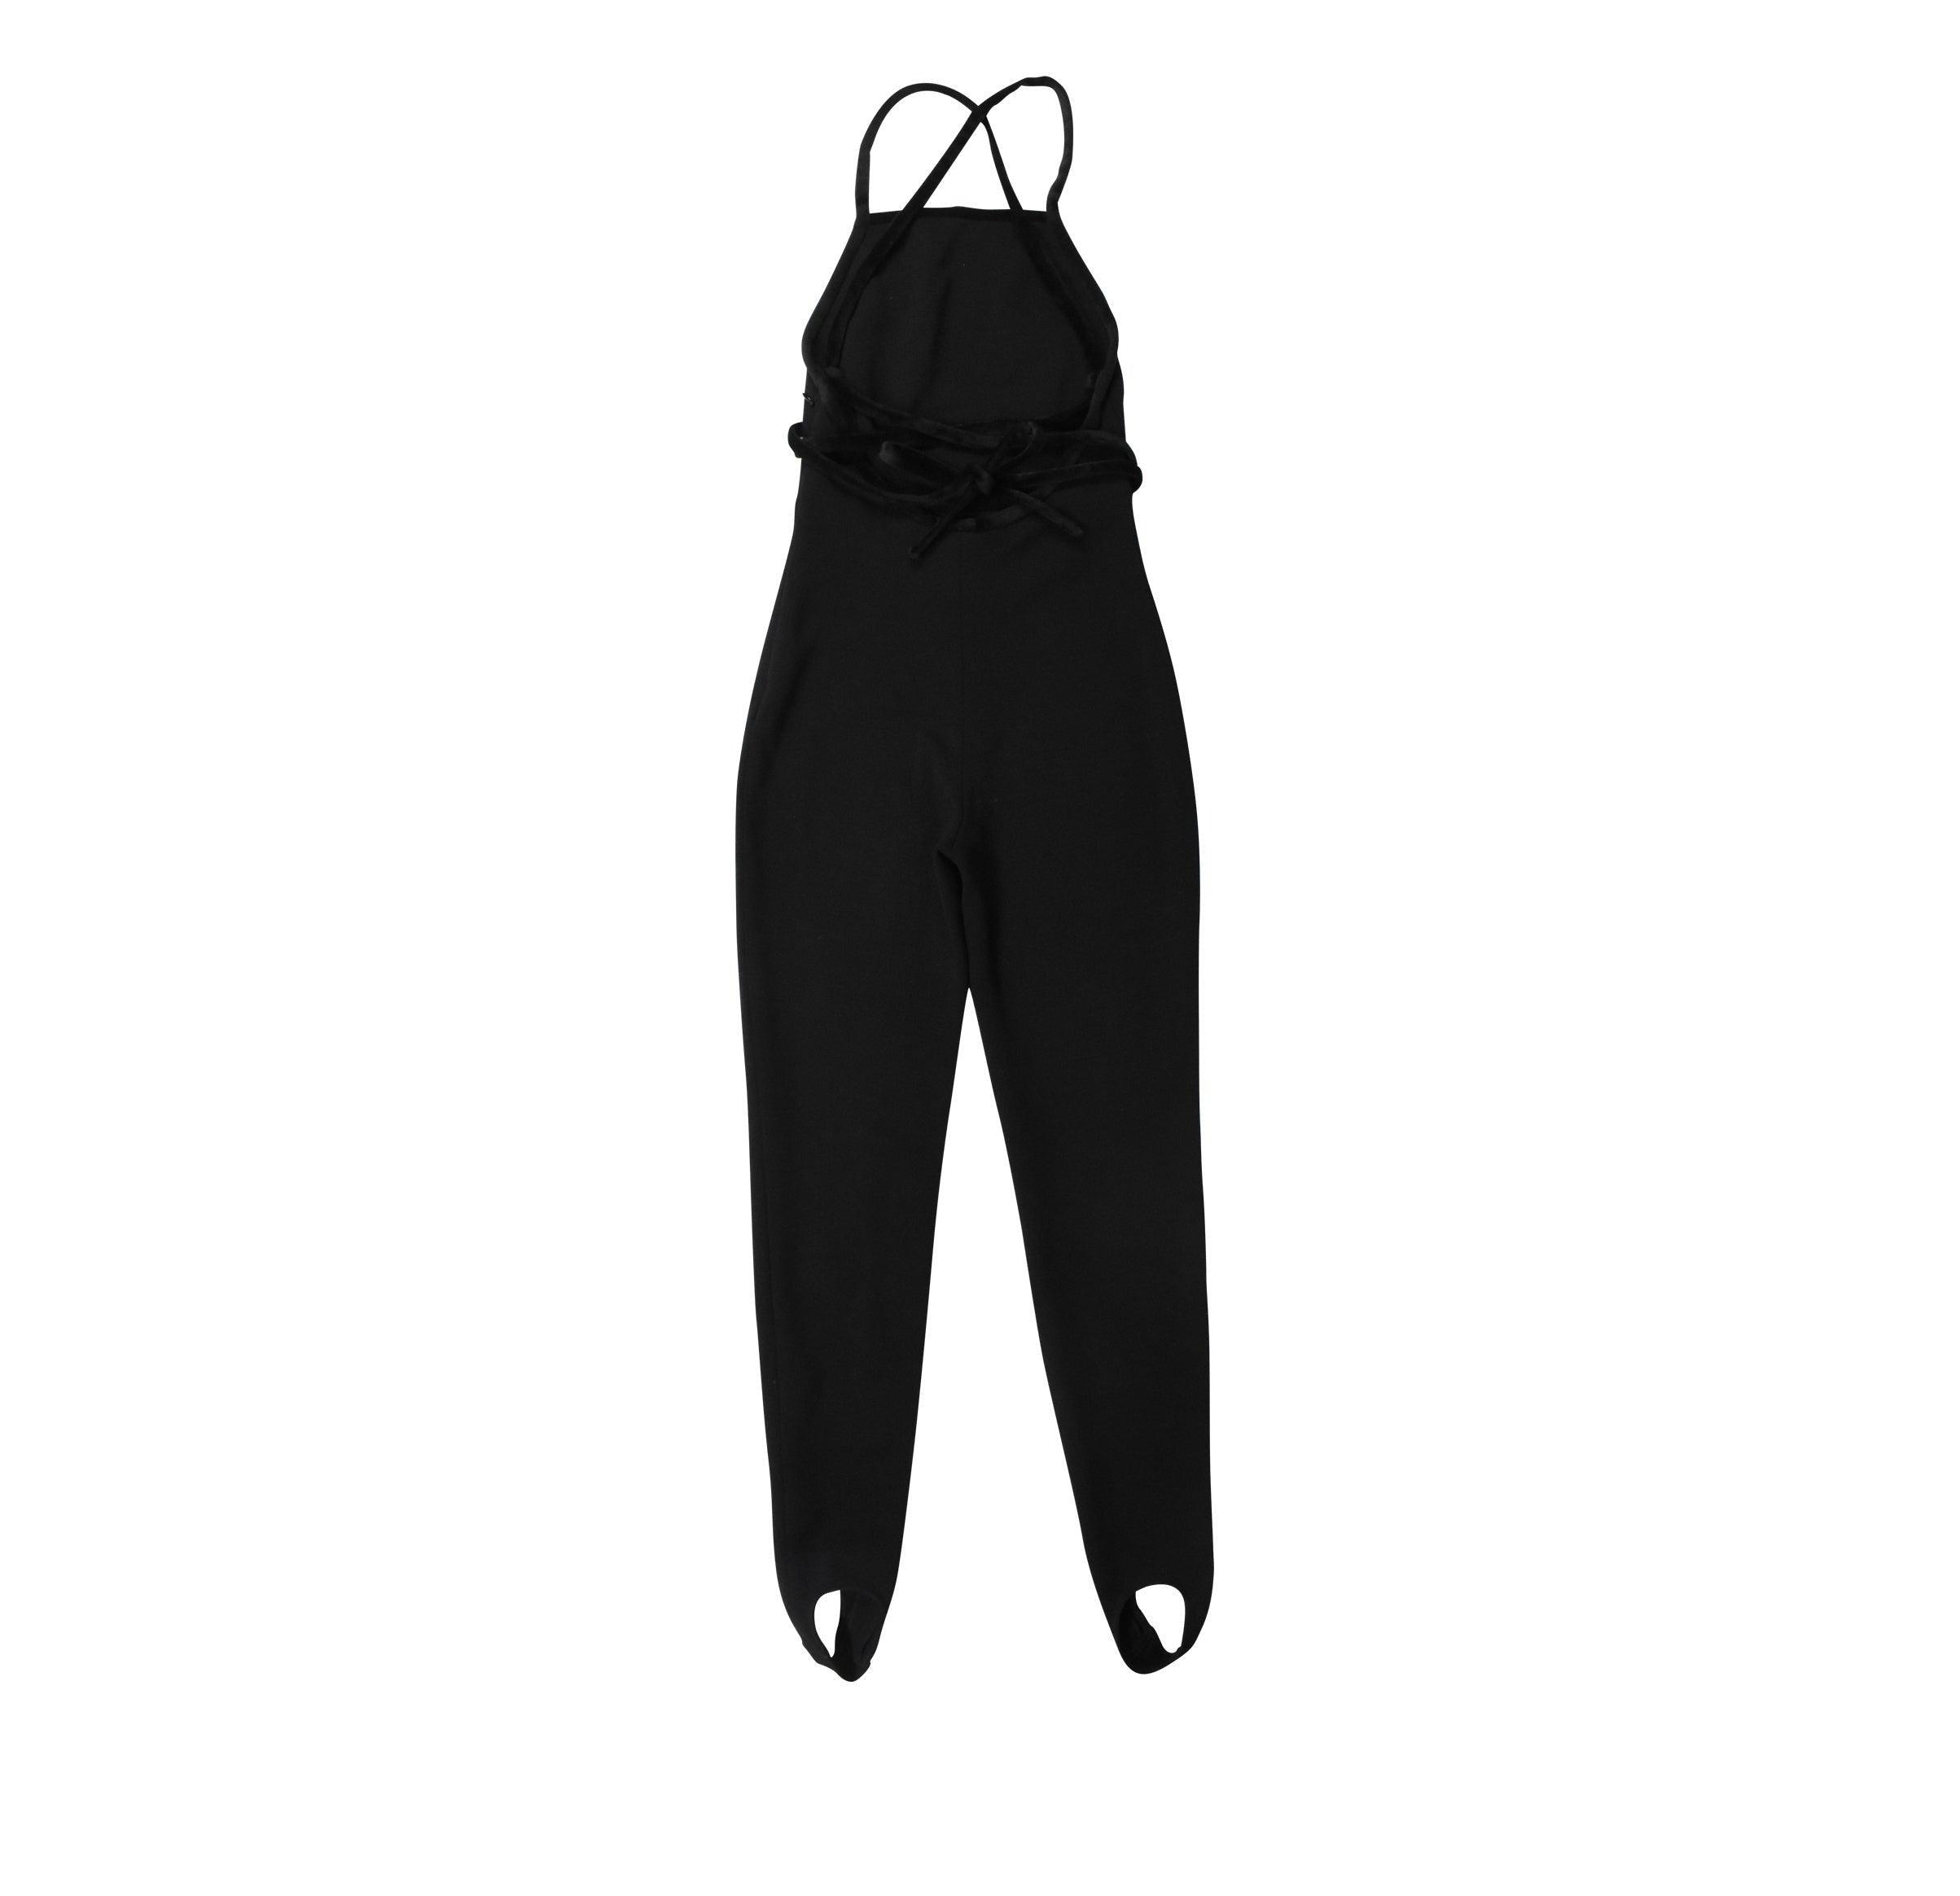 Chanel Jumpsuit - Women's 34 - Fashionably Yours